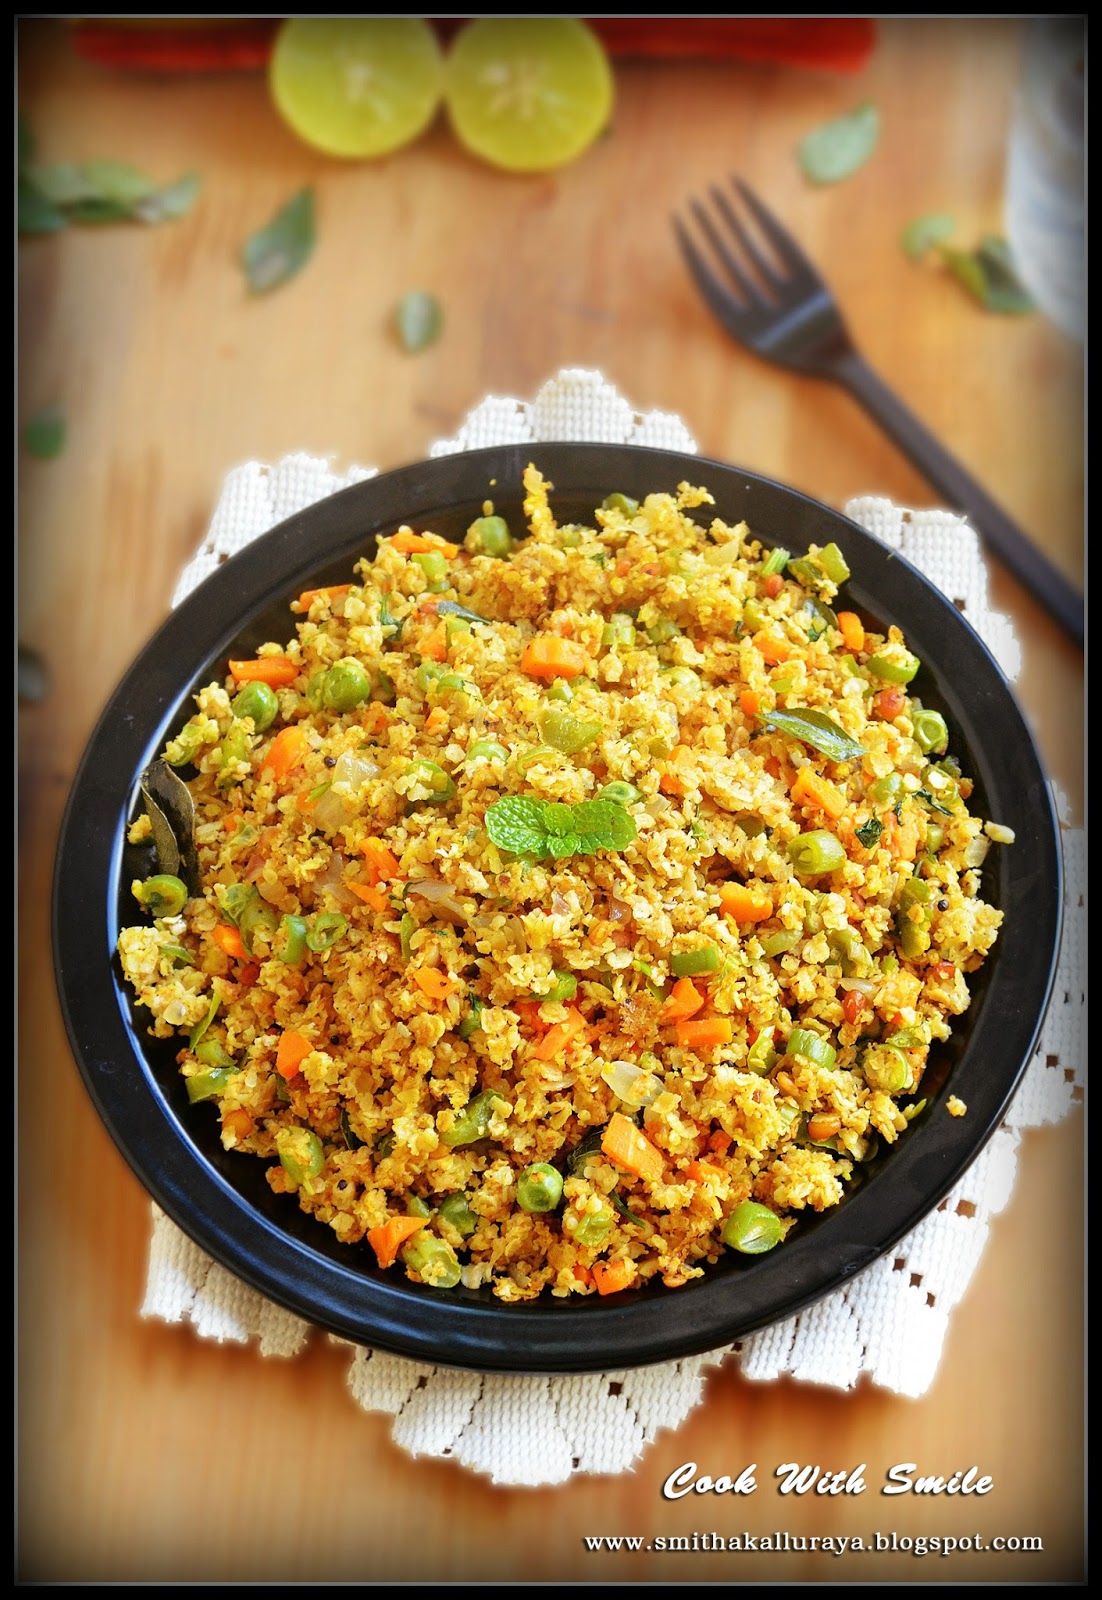 OATS UPMA / INSTANT VEGETABLE OATS UPMA RECIPE ~ Cook With Smile